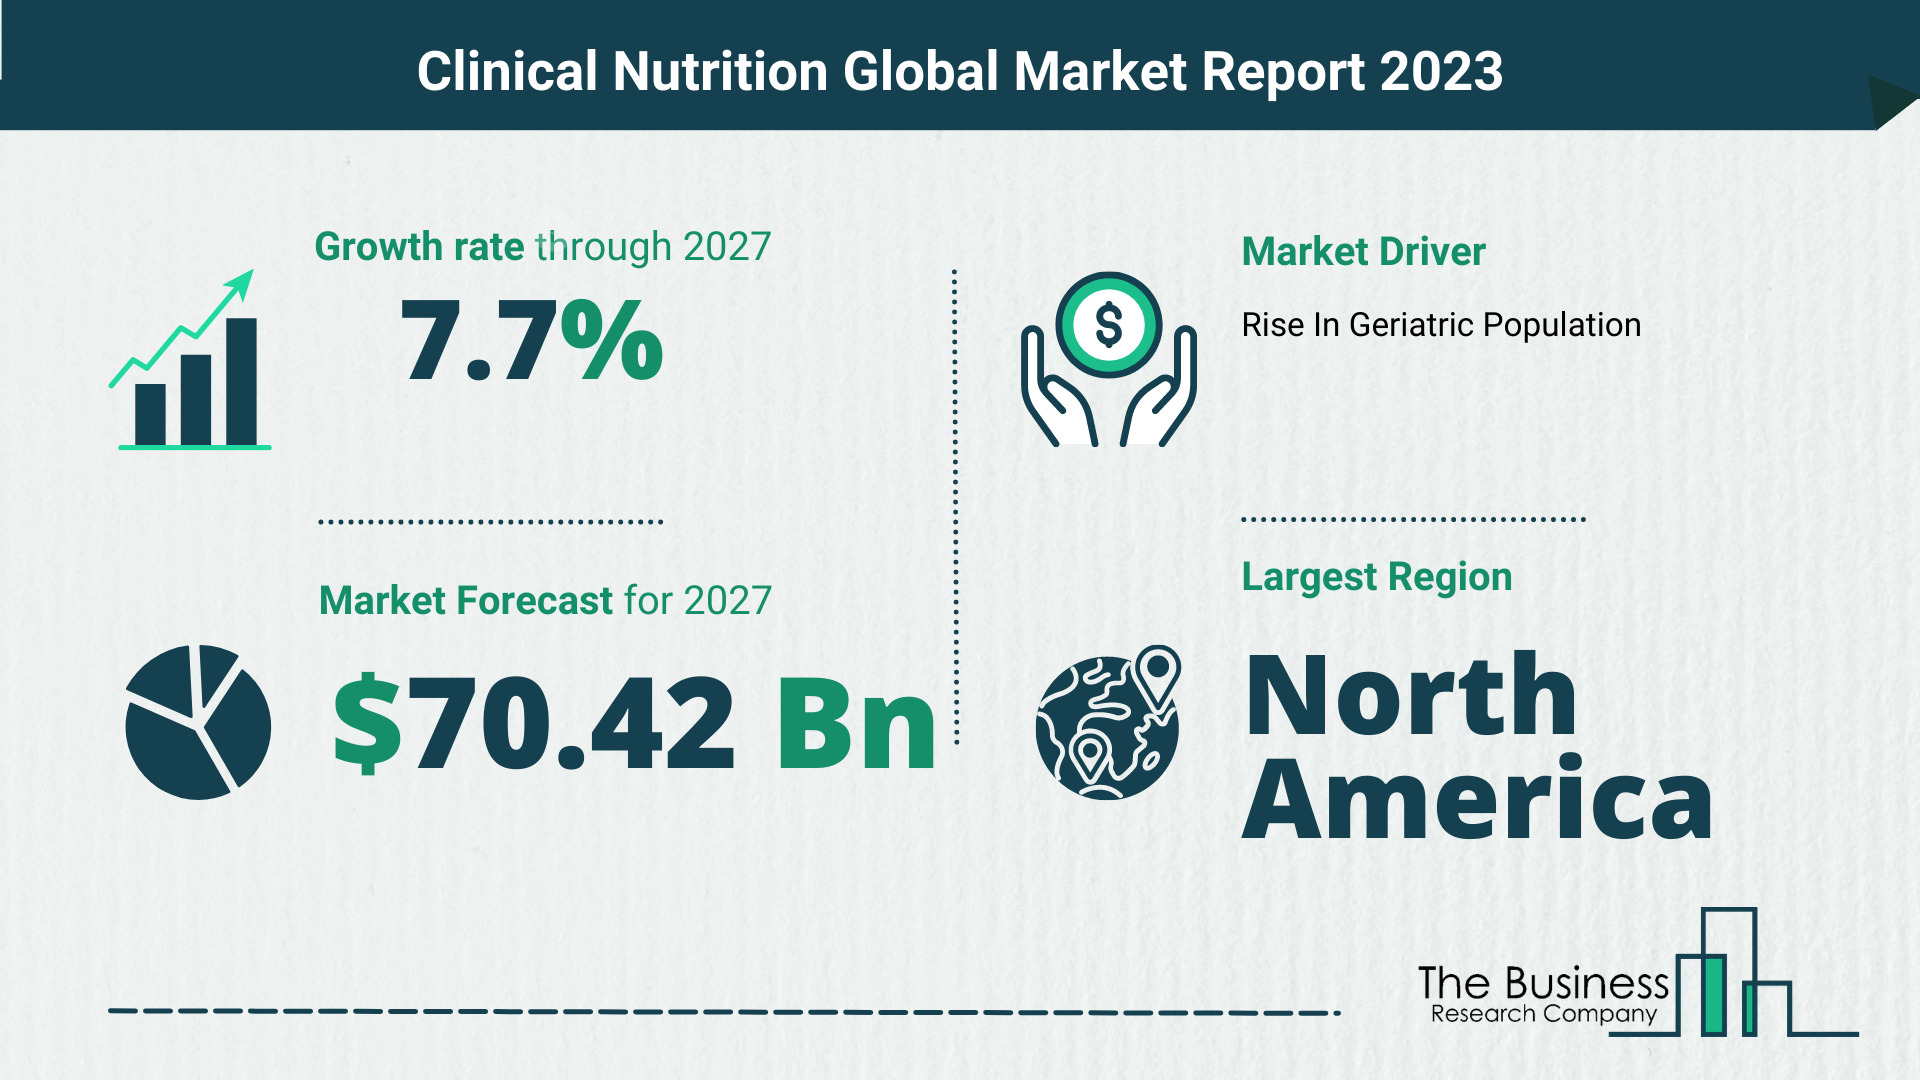 How Will The Clinical Nutrition Market Size Grow In The Coming Years?